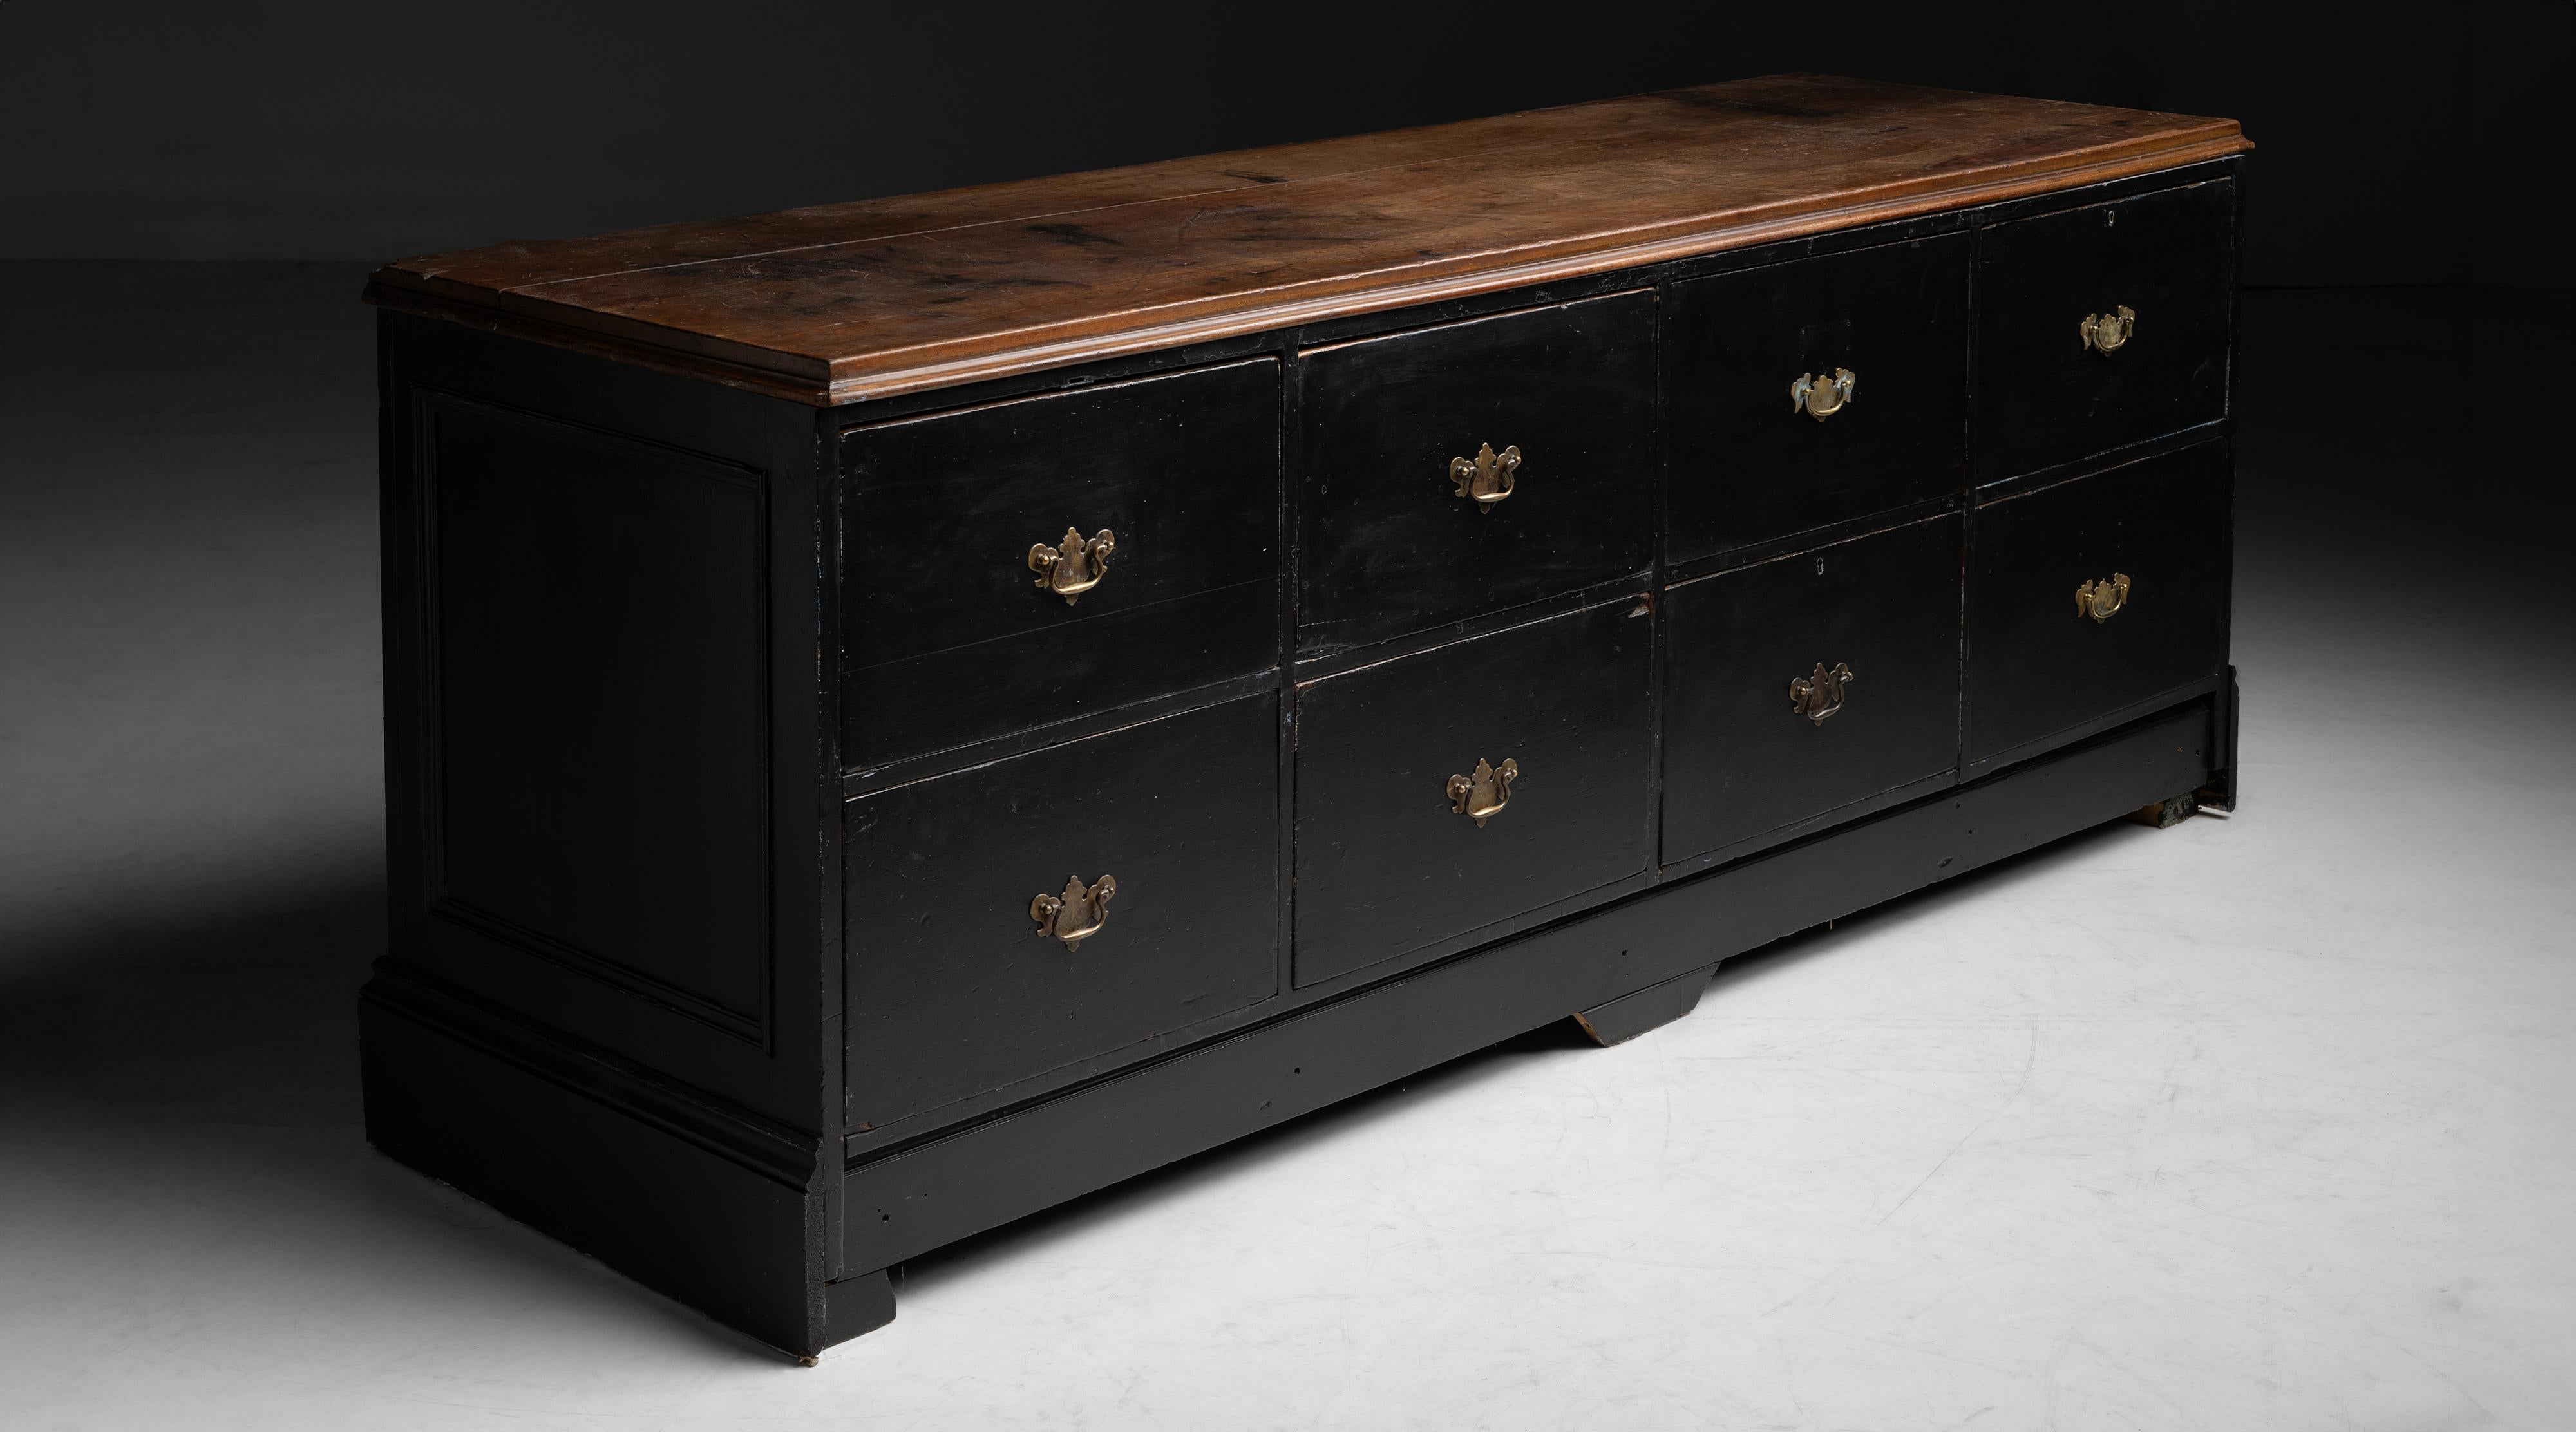 England circa 1900
With weathered surface, 8 drawers, brass handles, painted surface and finished back.
97”L x 29.25”d x 38.5”h